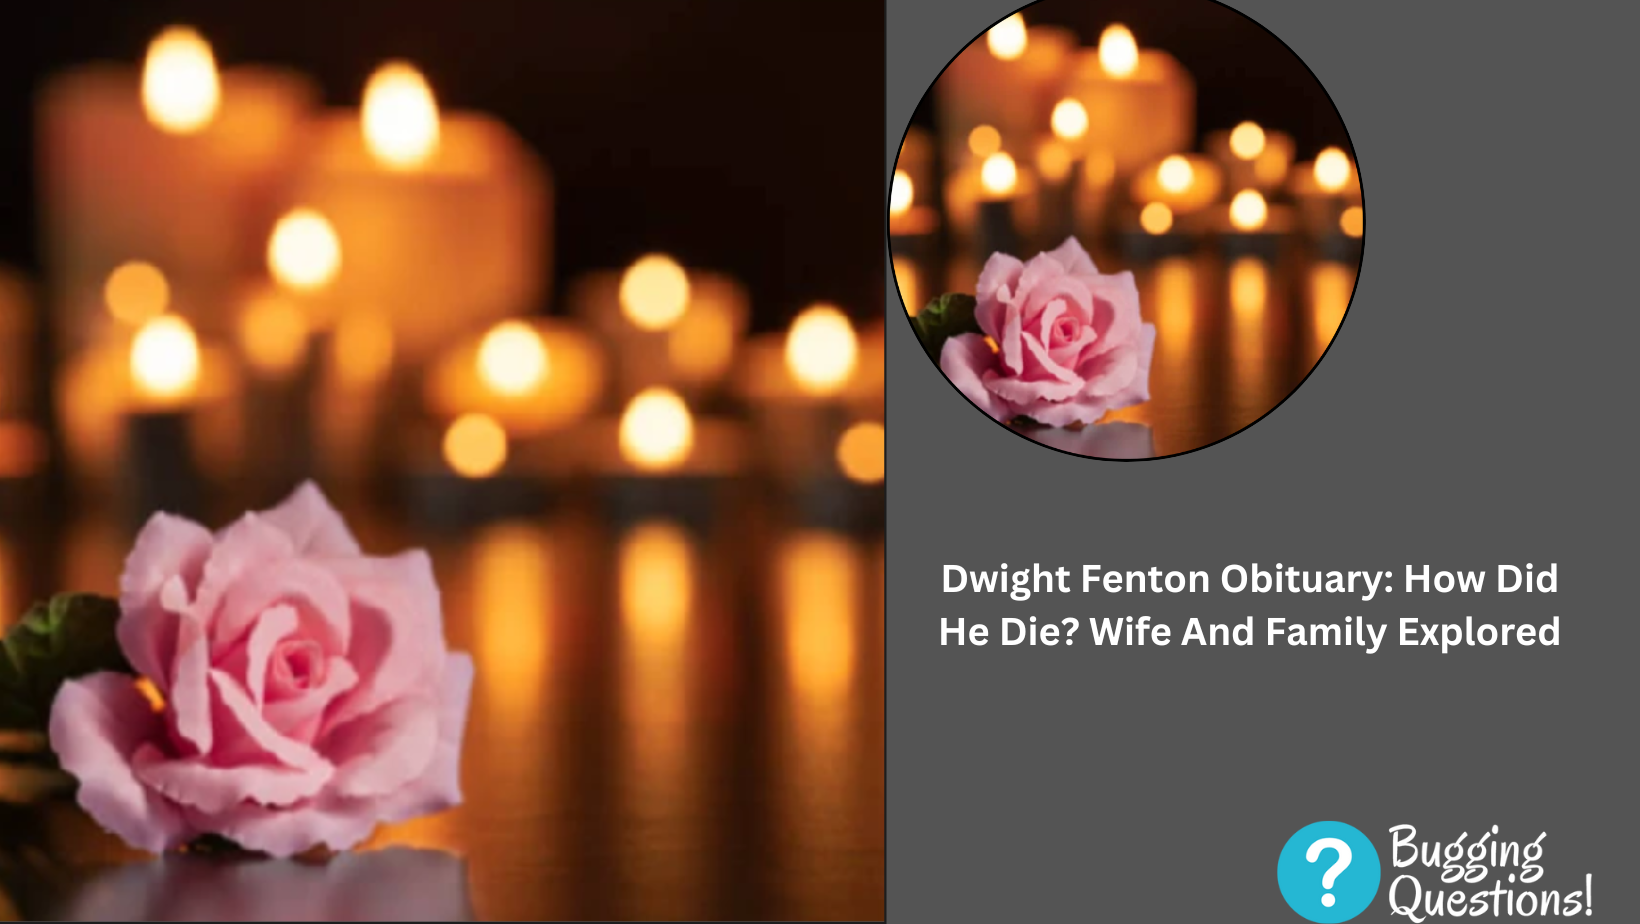 Dwight Fenton Obituary: How Did He Die?